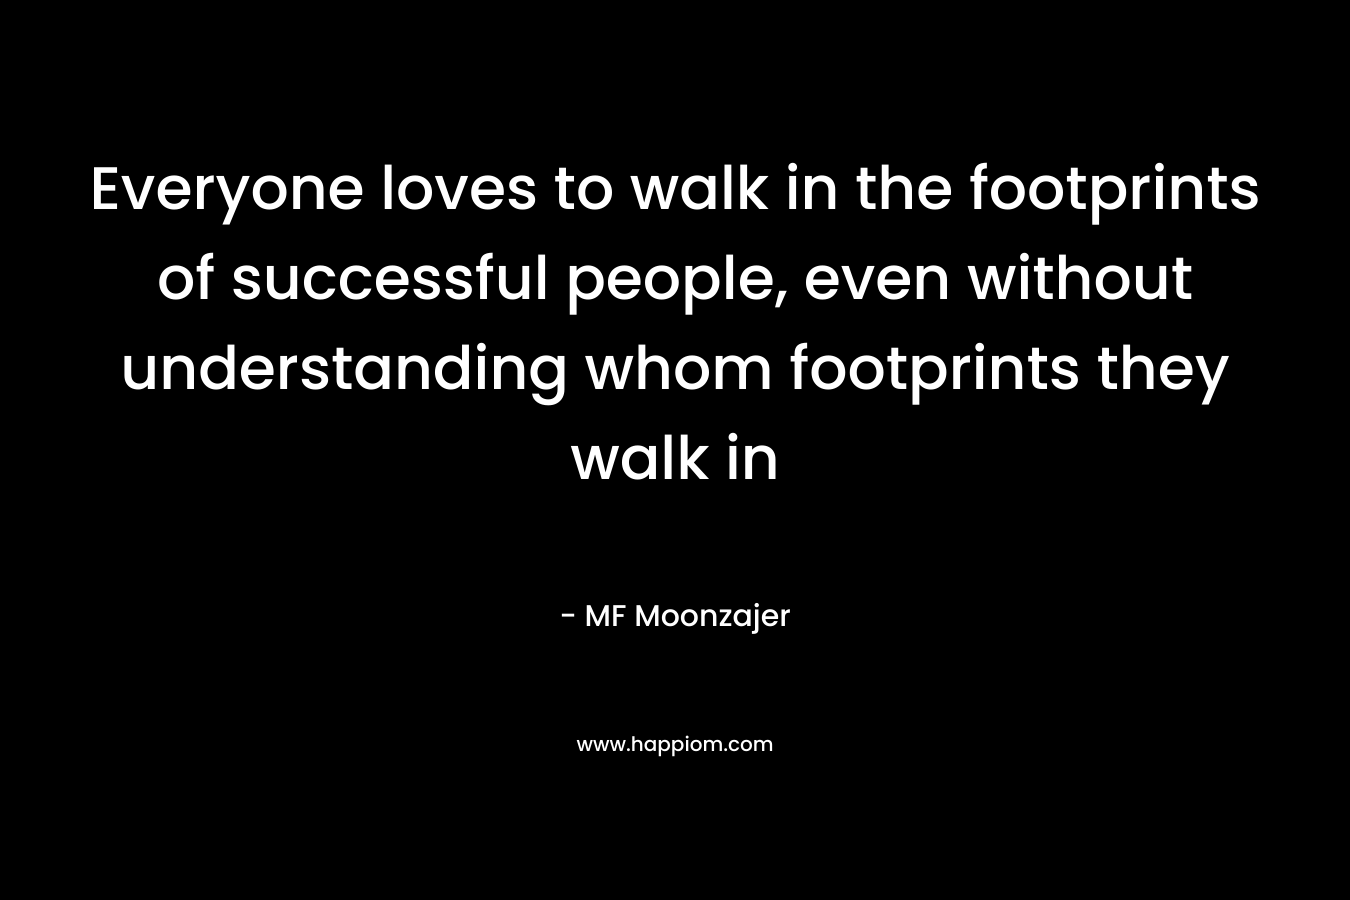 Everyone loves to walk in the footprints of successful people, even without understanding whom footprints they walk in